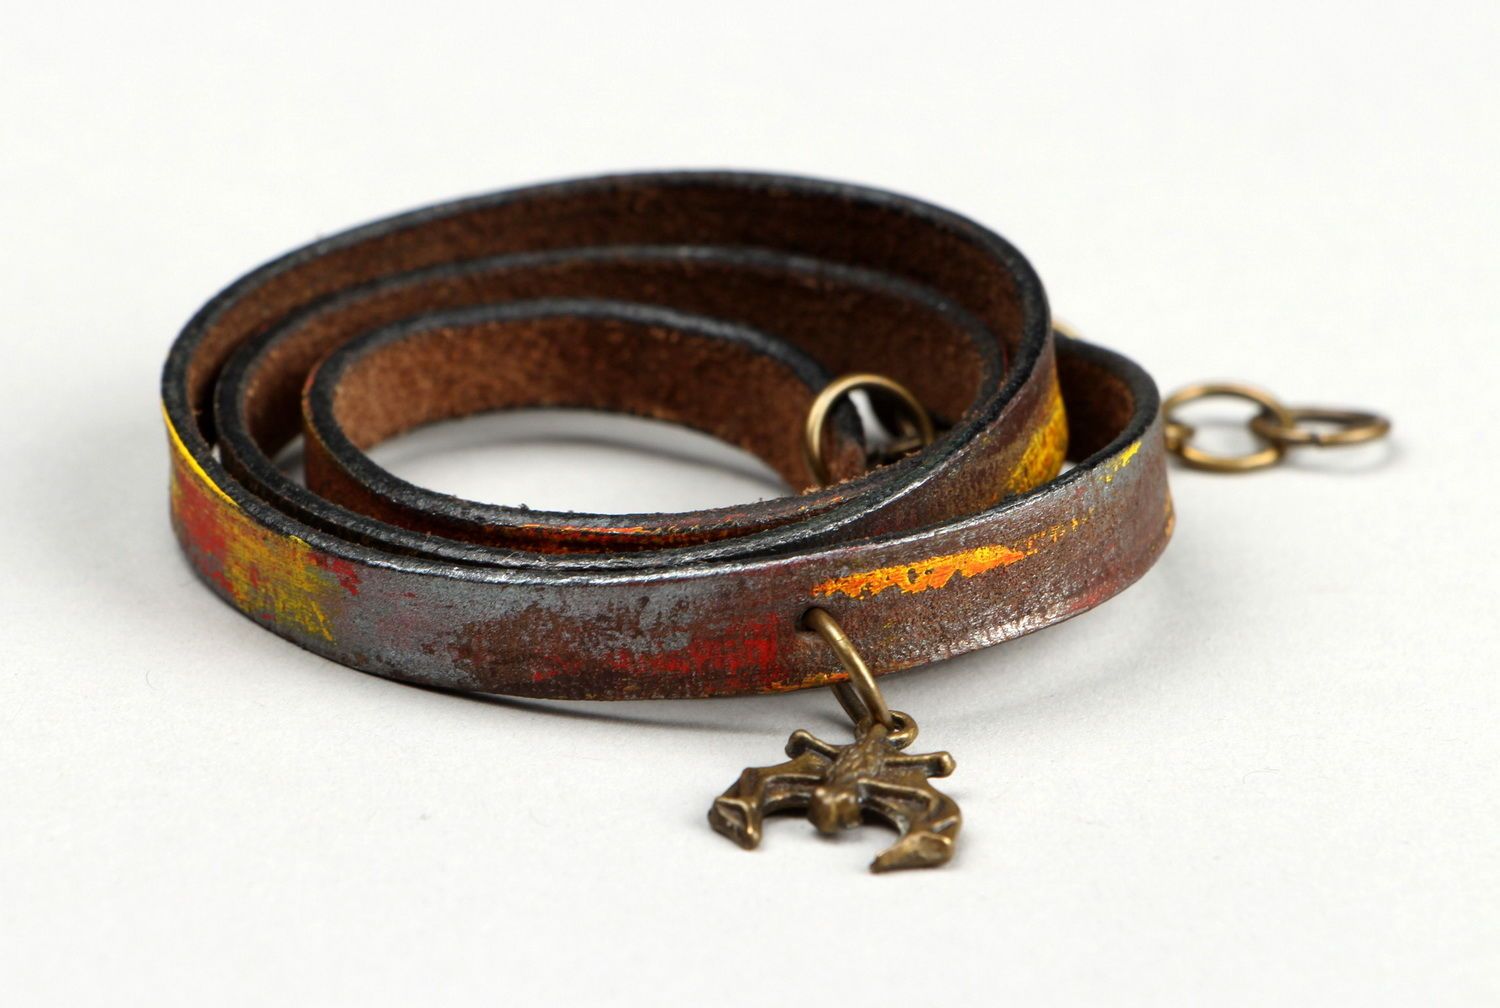 Leather bracelet with a pendant in the shape of a bat photo 2